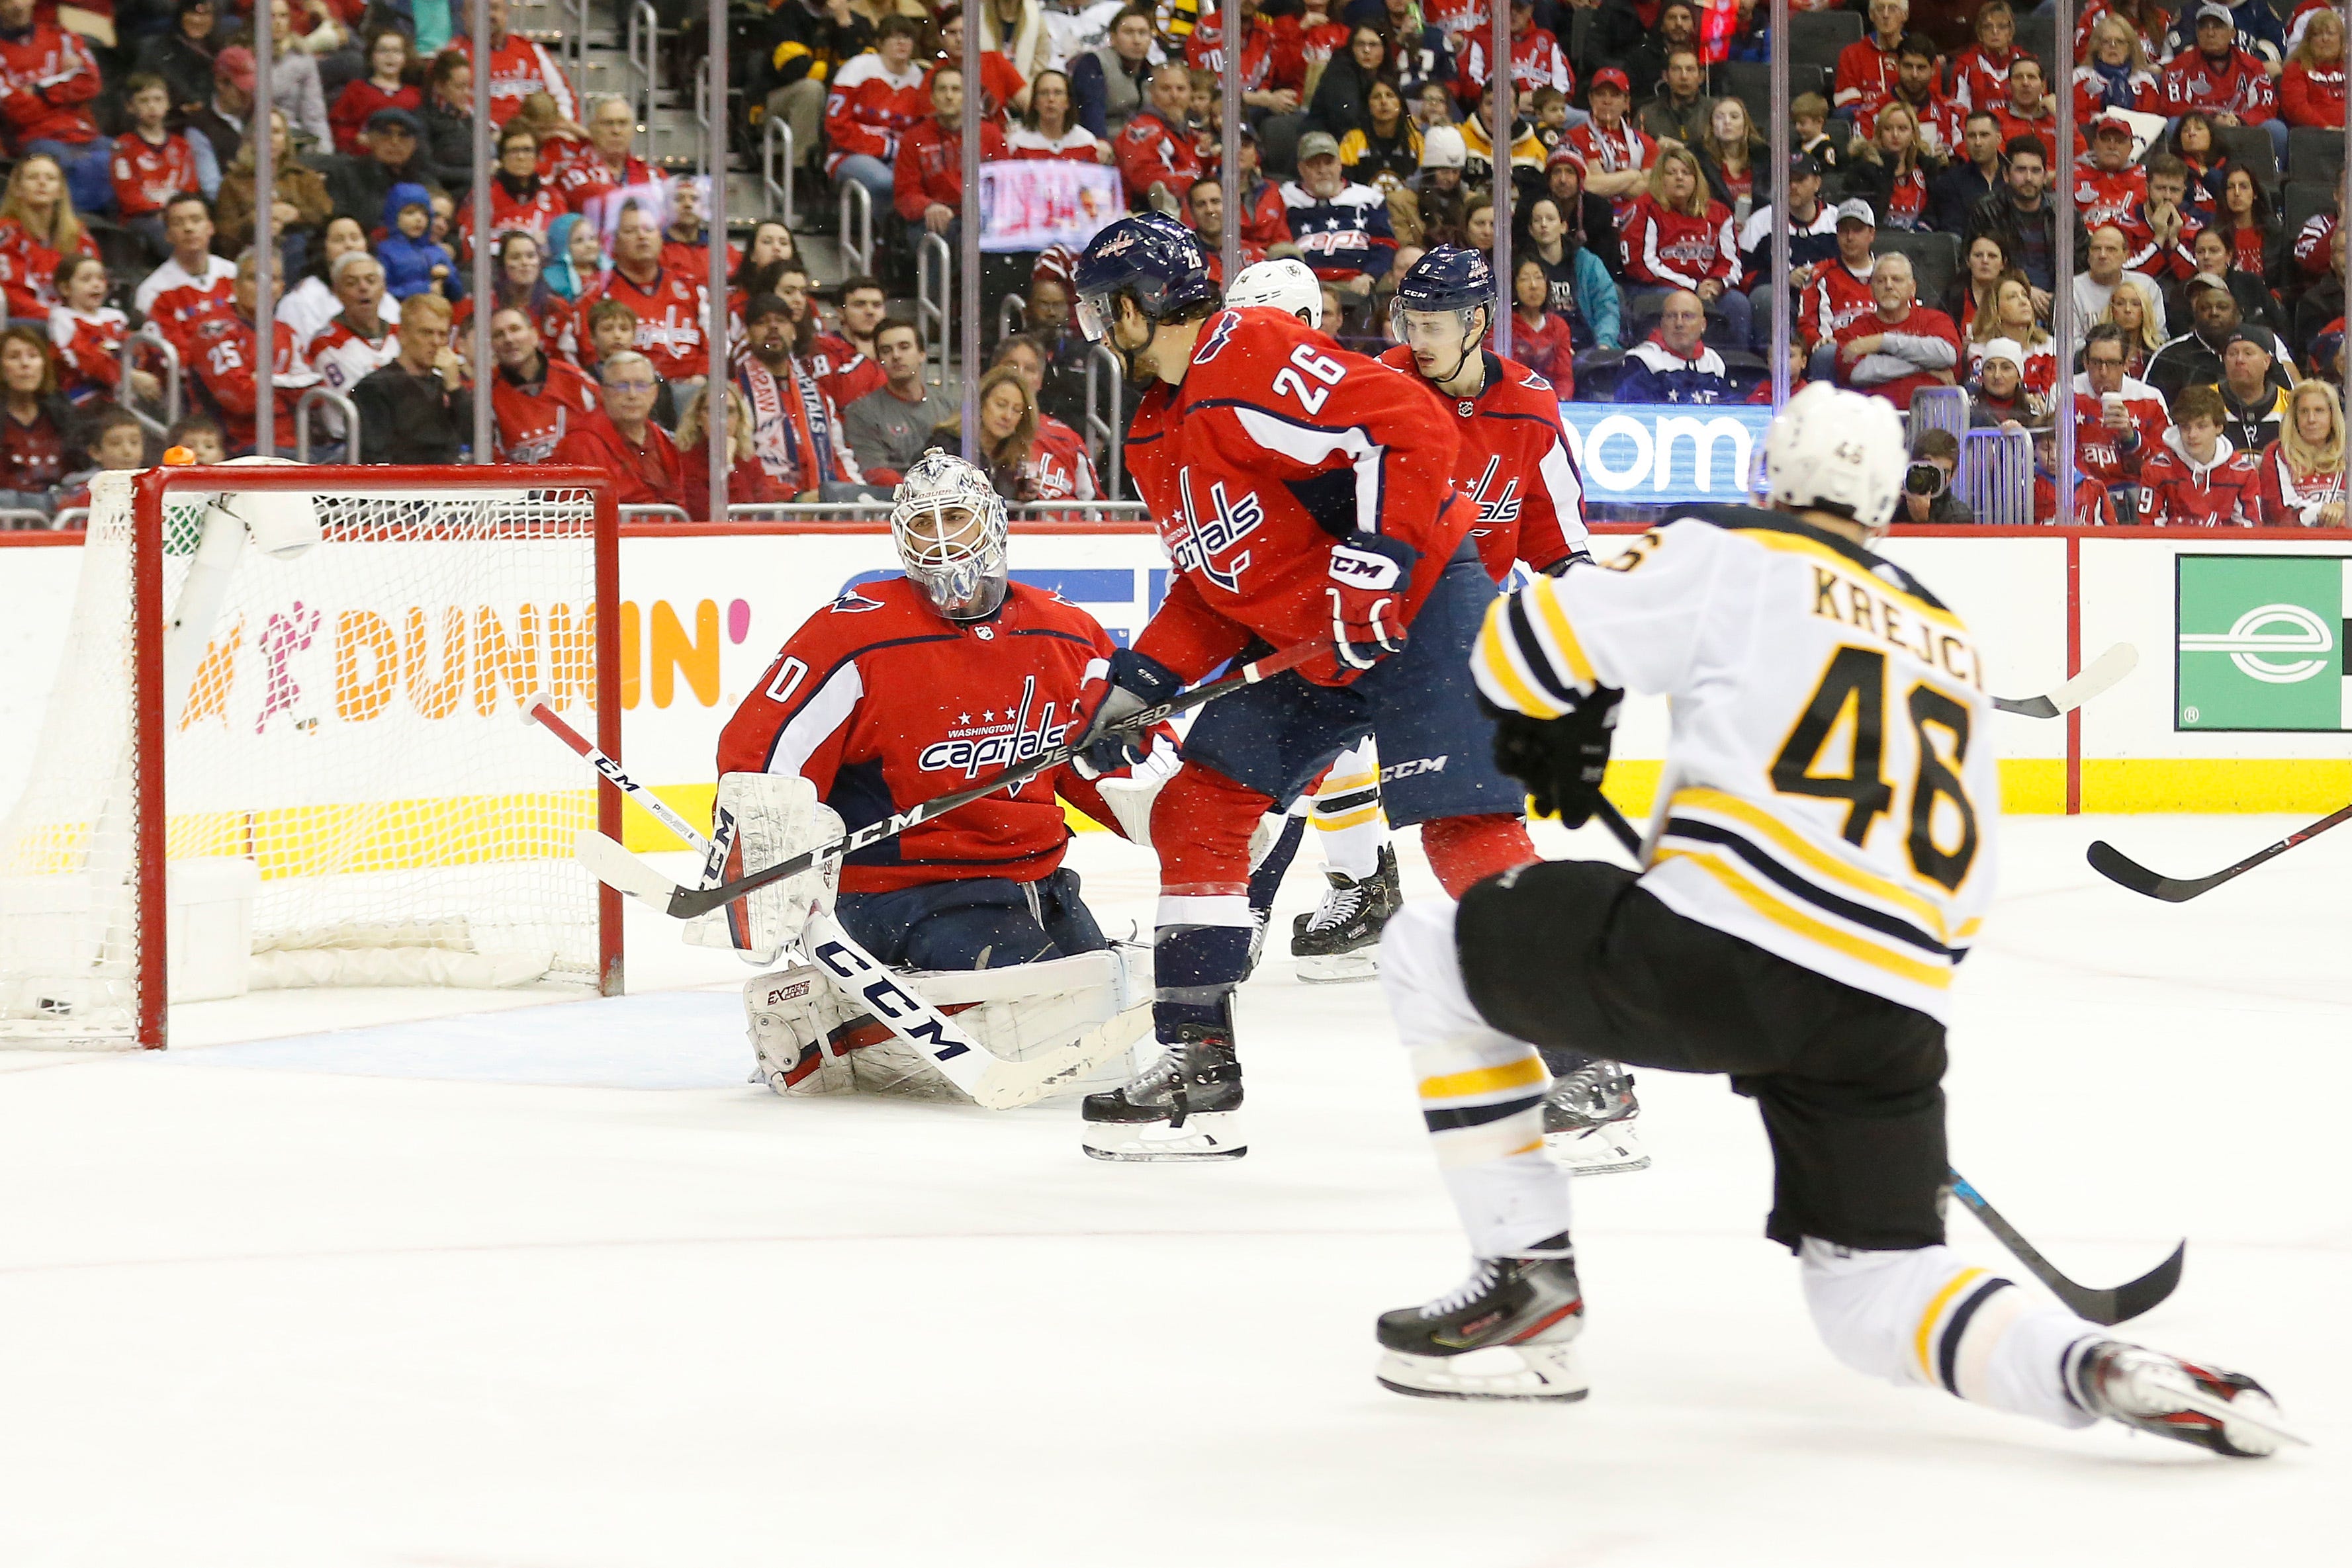 Bruins beat Capitals 1-0 to end 14-game streak of futility